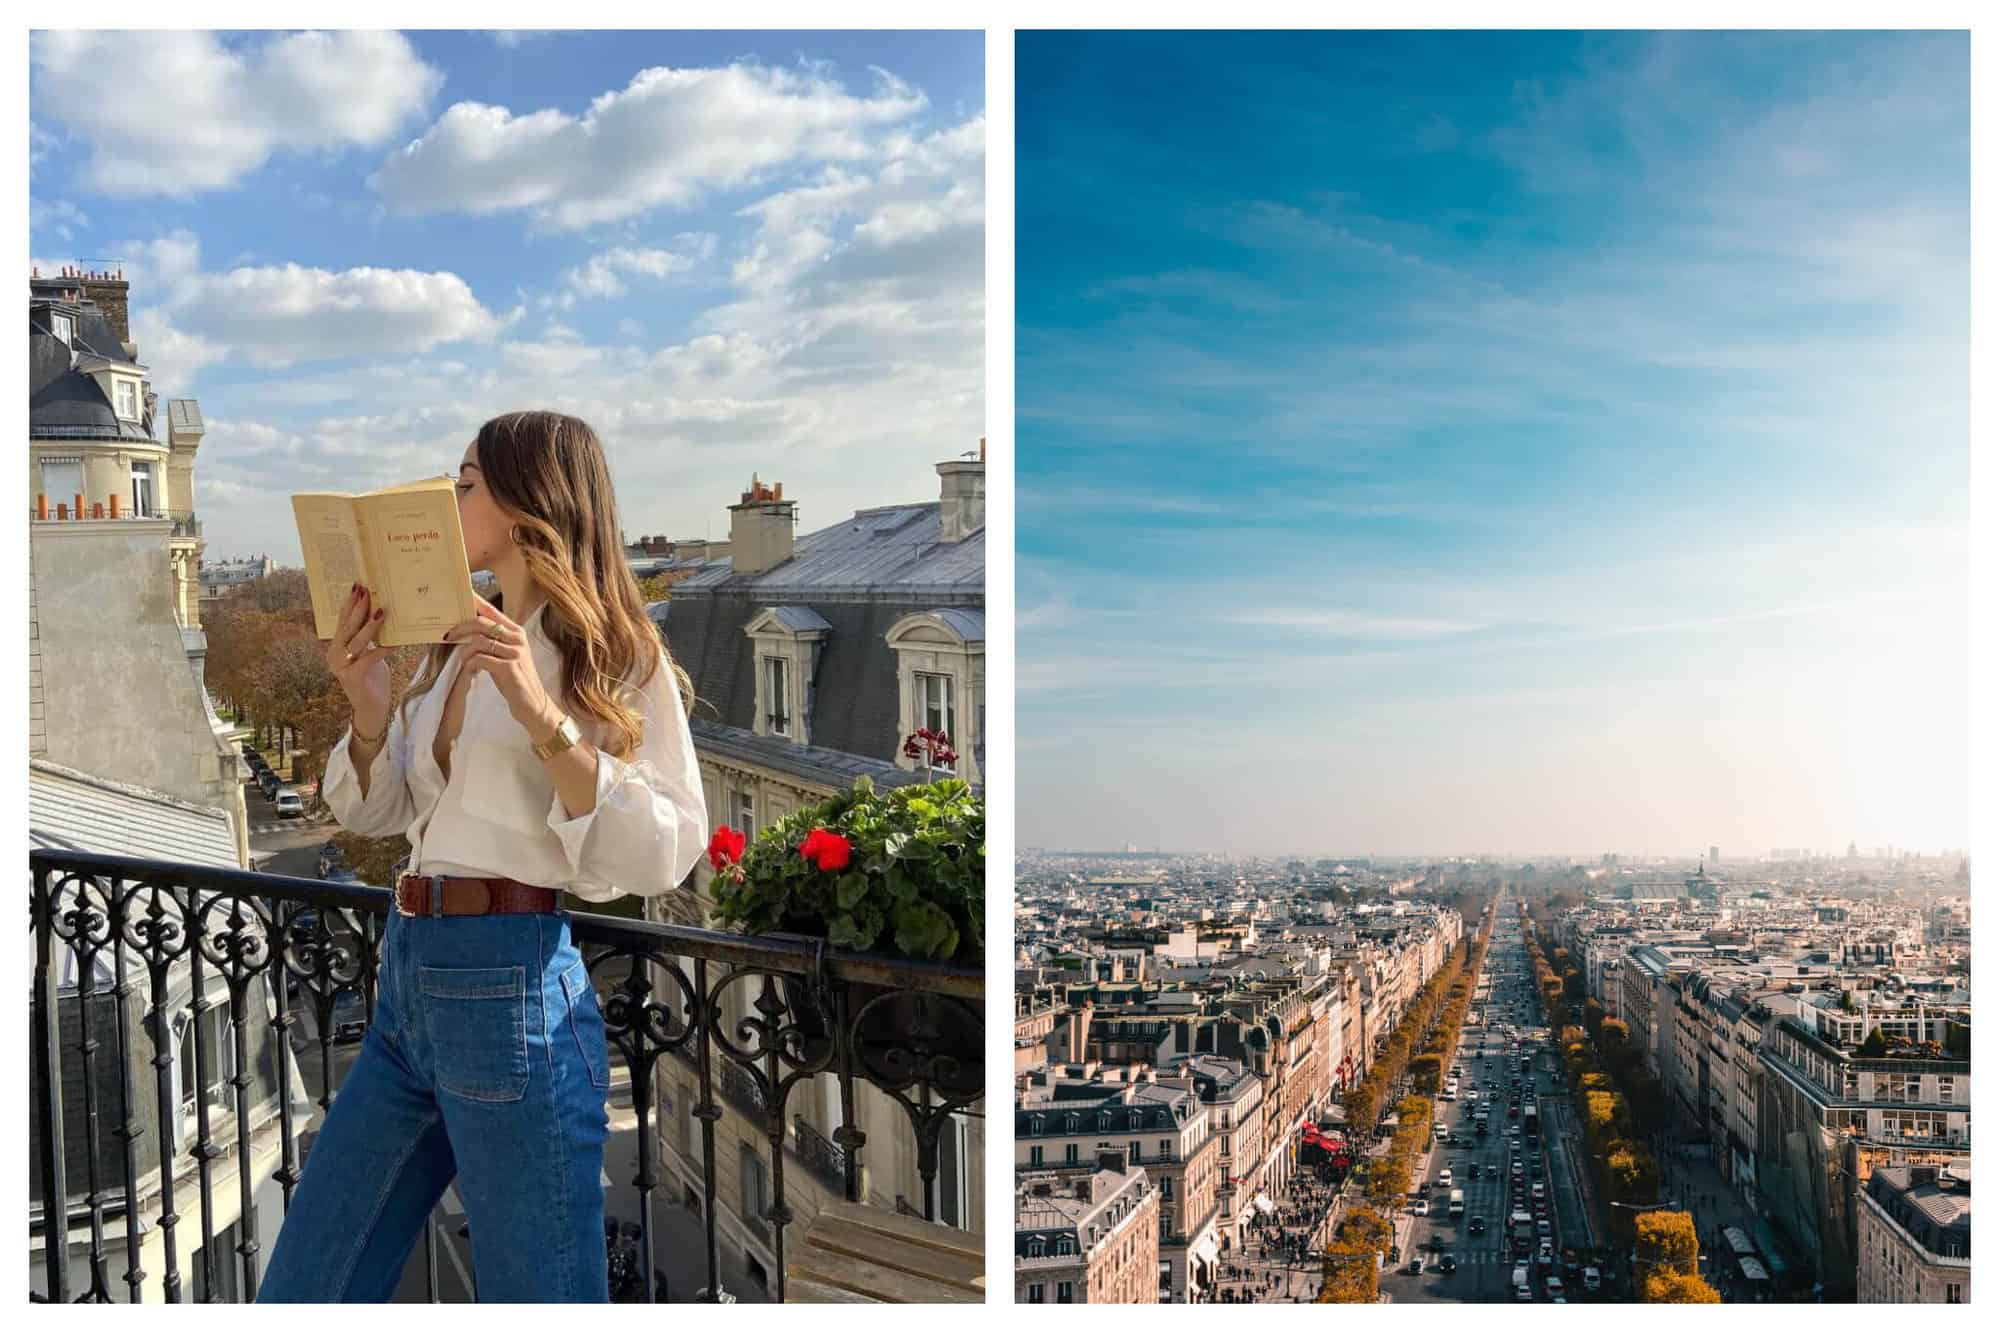 Left: A woman reads a book in a Parisian balcony. She is wearing a white long-sleeved top and denim jeans. Right: Aerial views of the Avenue de Champs Elysées.